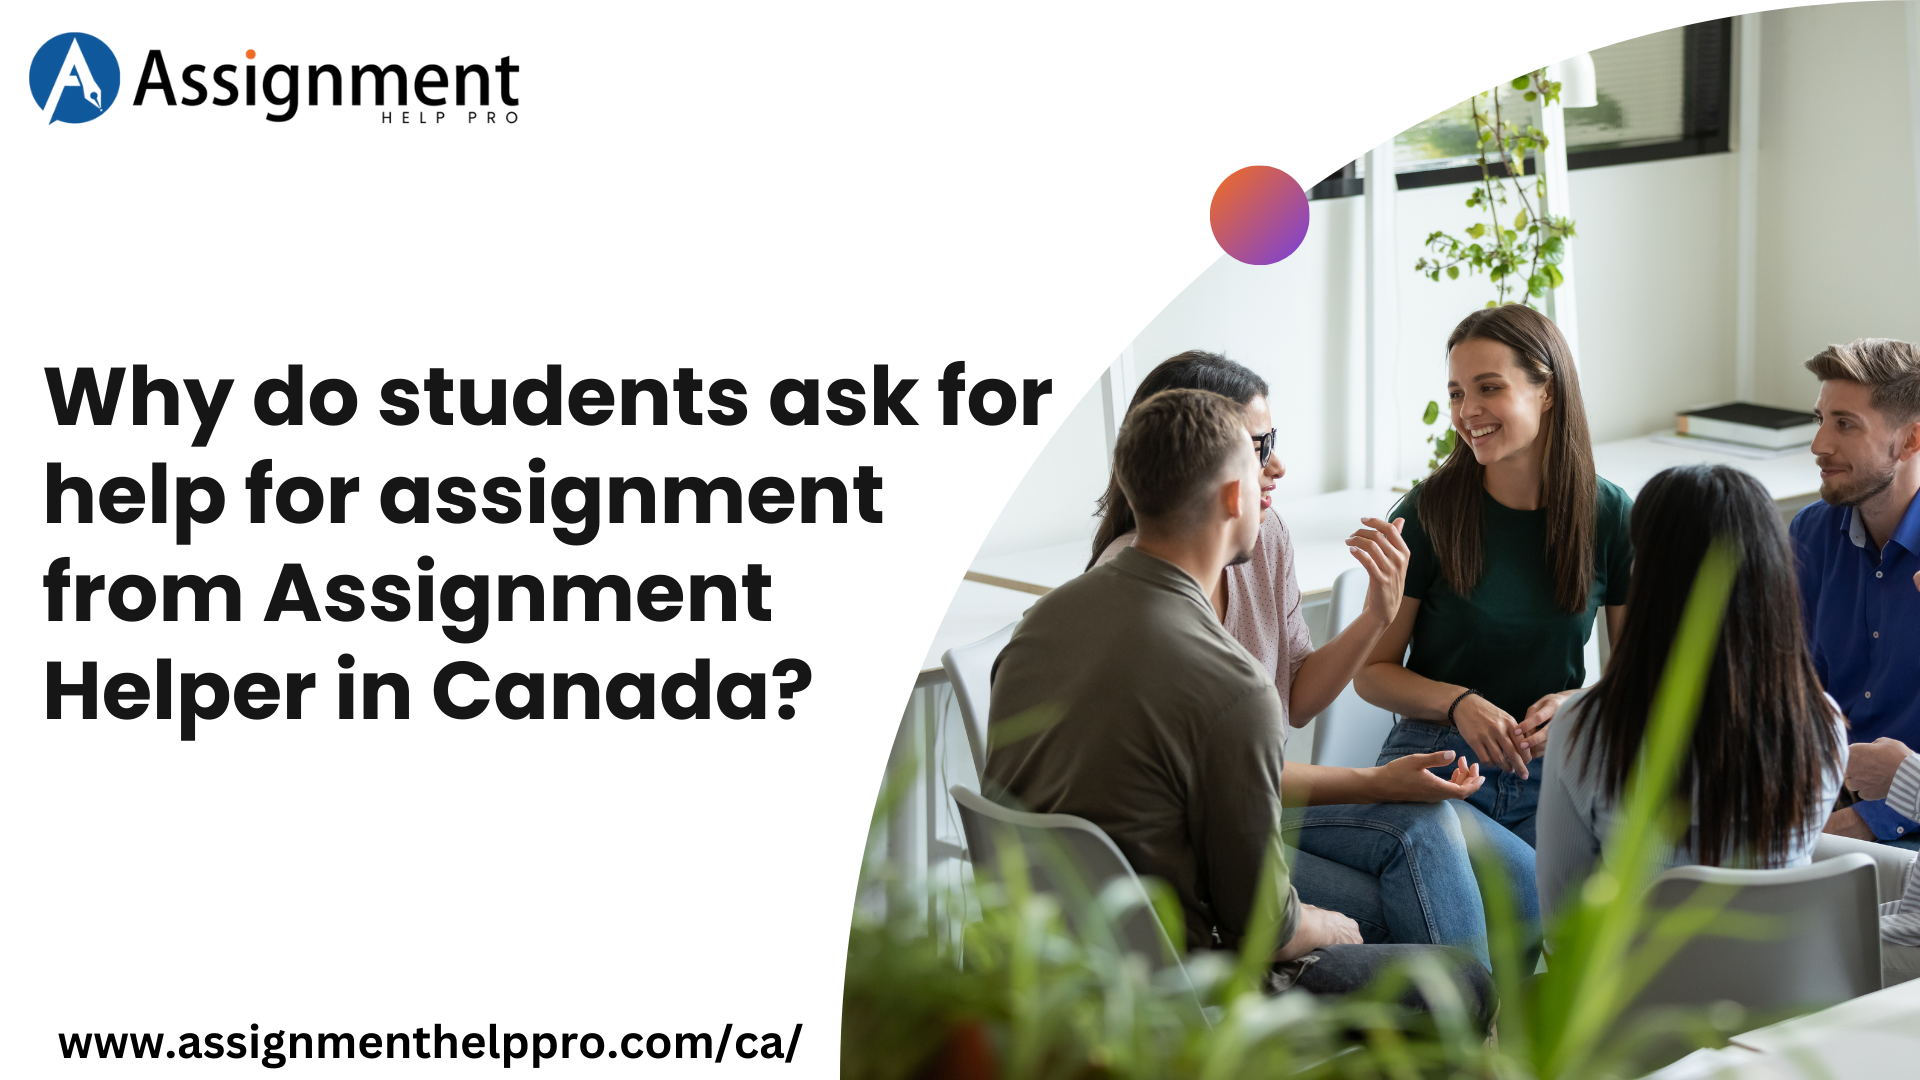 Why do students ask for help for assignment from Assignment Helper in Canada? – Hs Creats